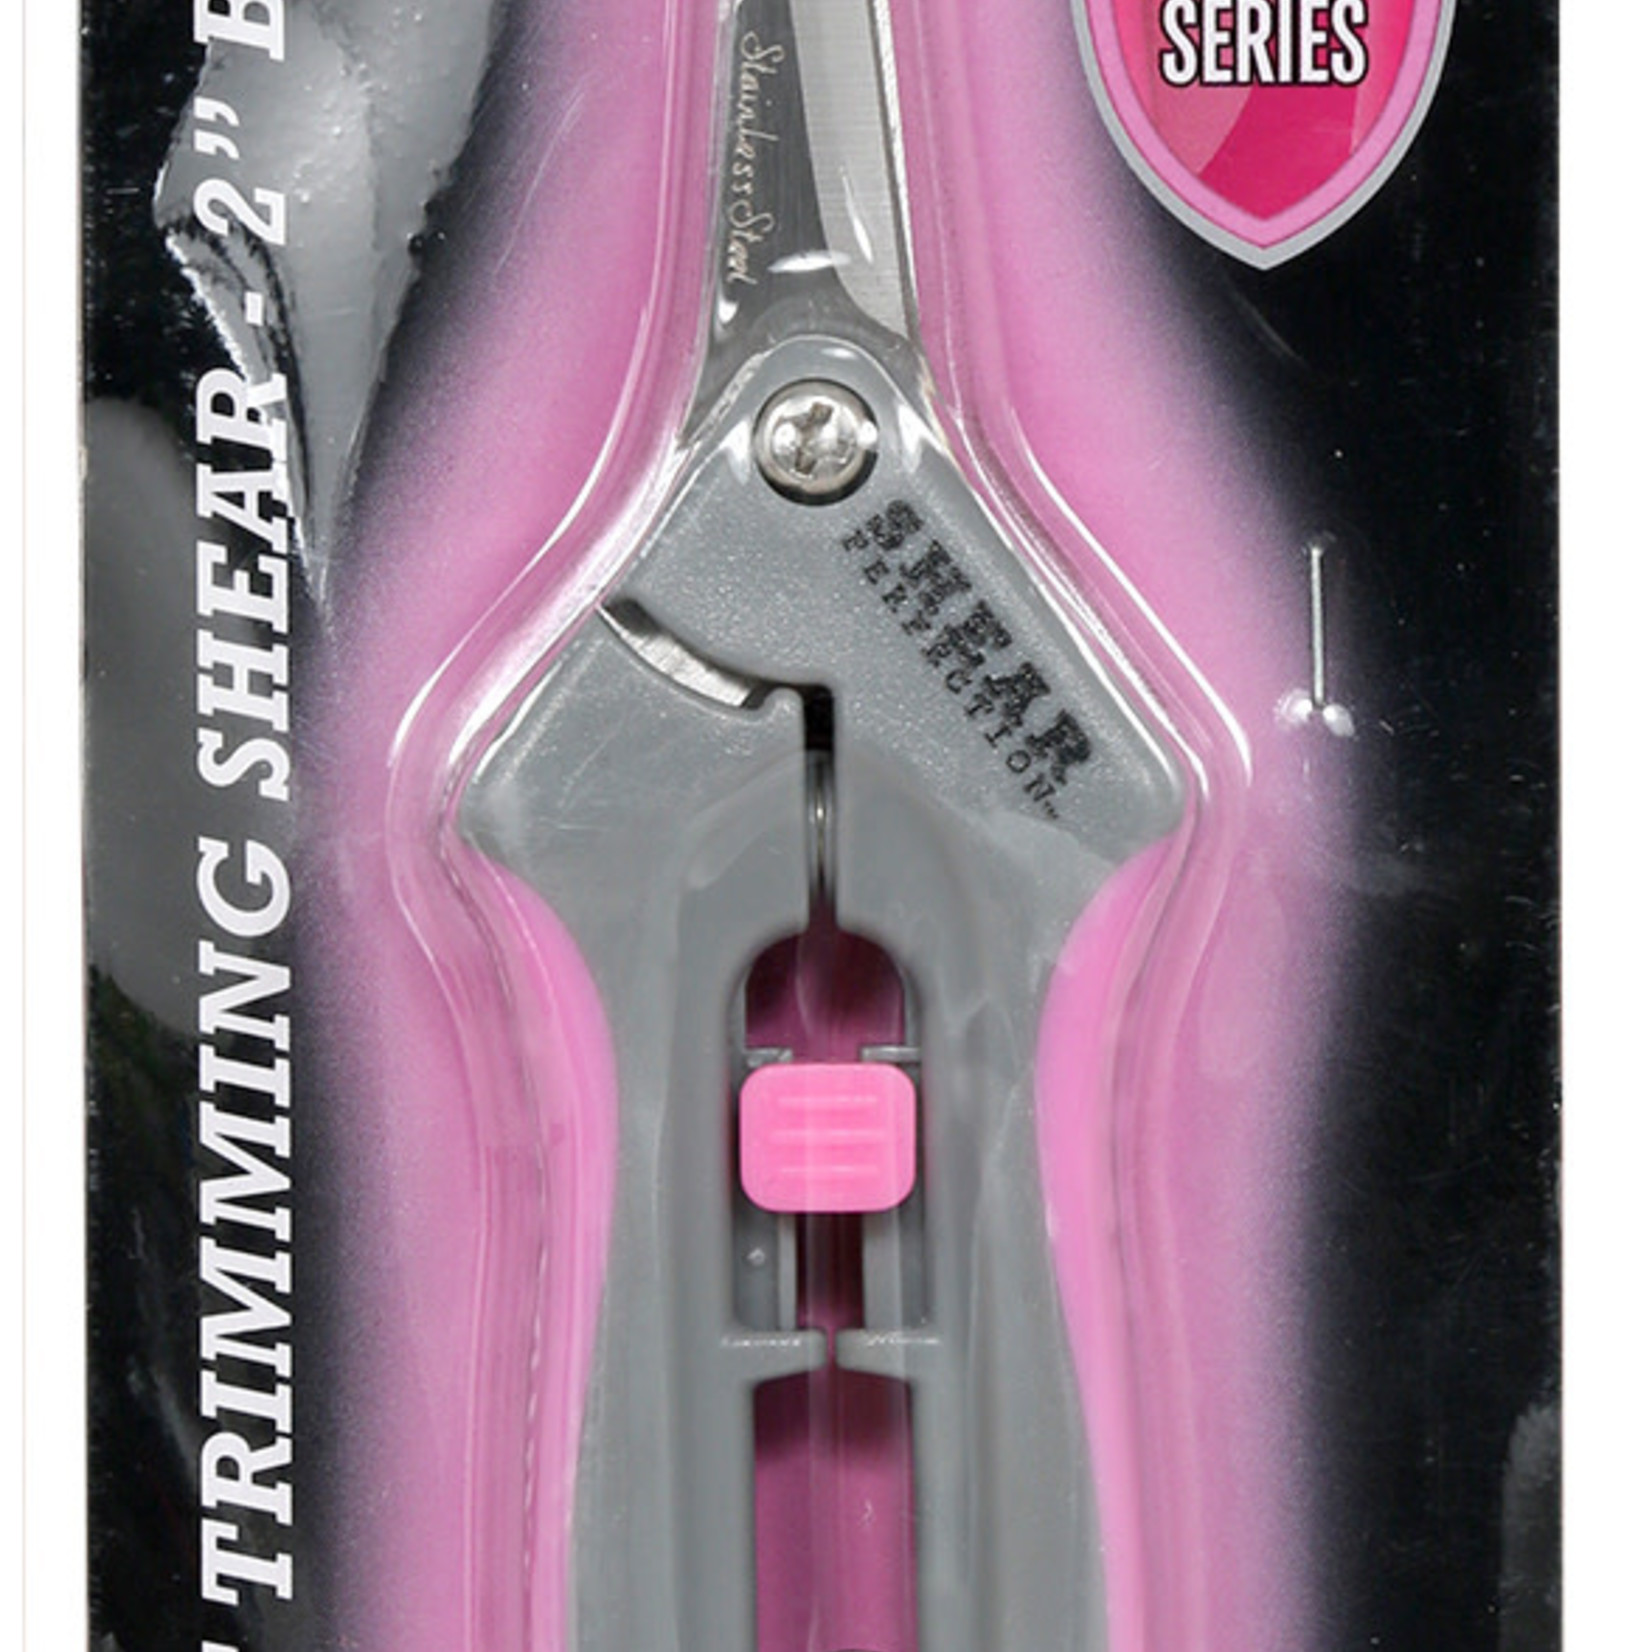 Shear Perfection Shear Perfection Pink Platinum Stainless Trimming Shear - 2 in Straight Blades